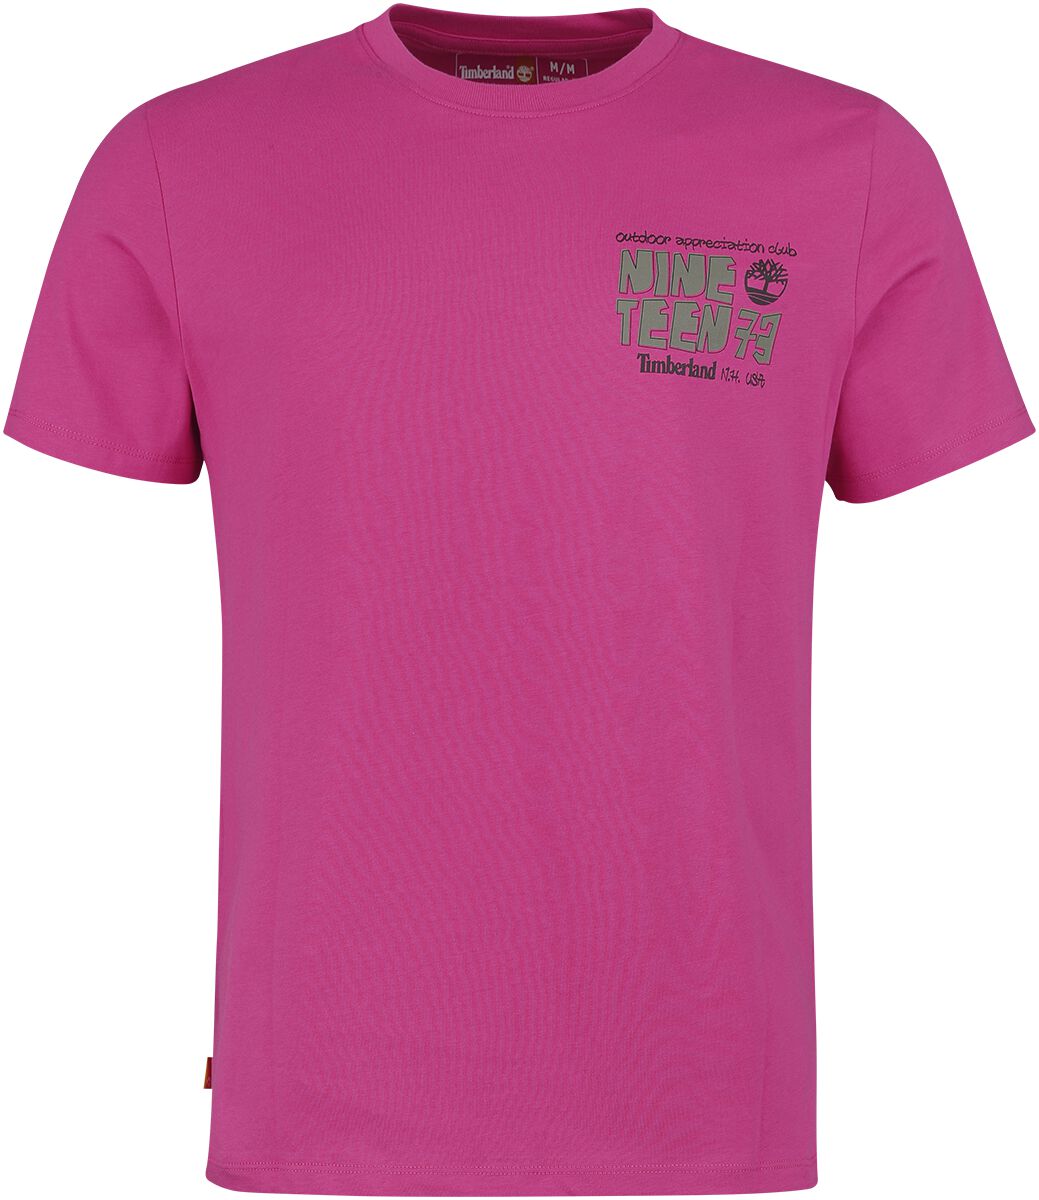 Timberland Outdoor Back Graphic Tee T-Shirt pink in S